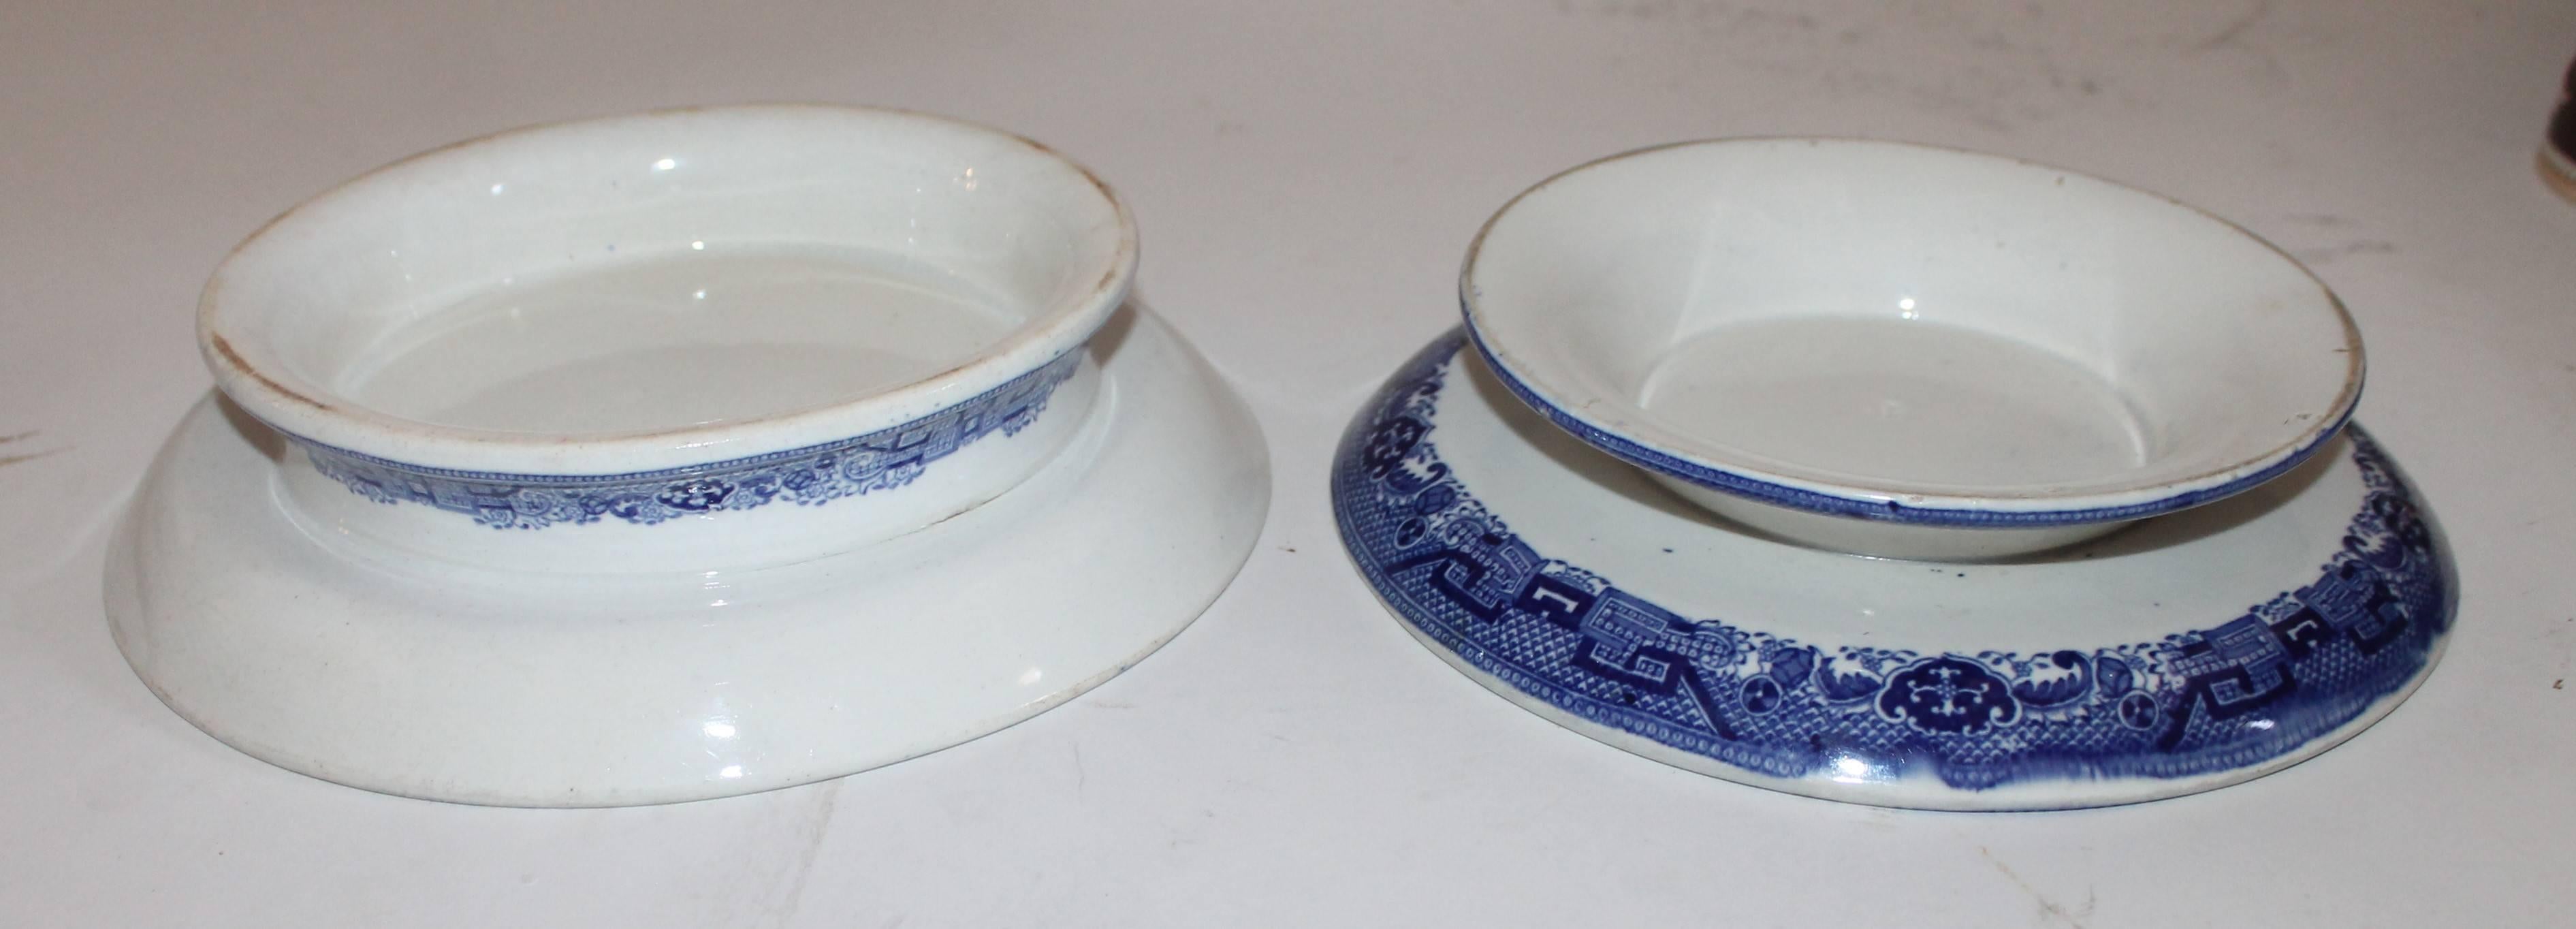 Pair of Early 19th Century English Blue Willow Cake Plates In Excellent Condition For Sale In Los Angeles, CA